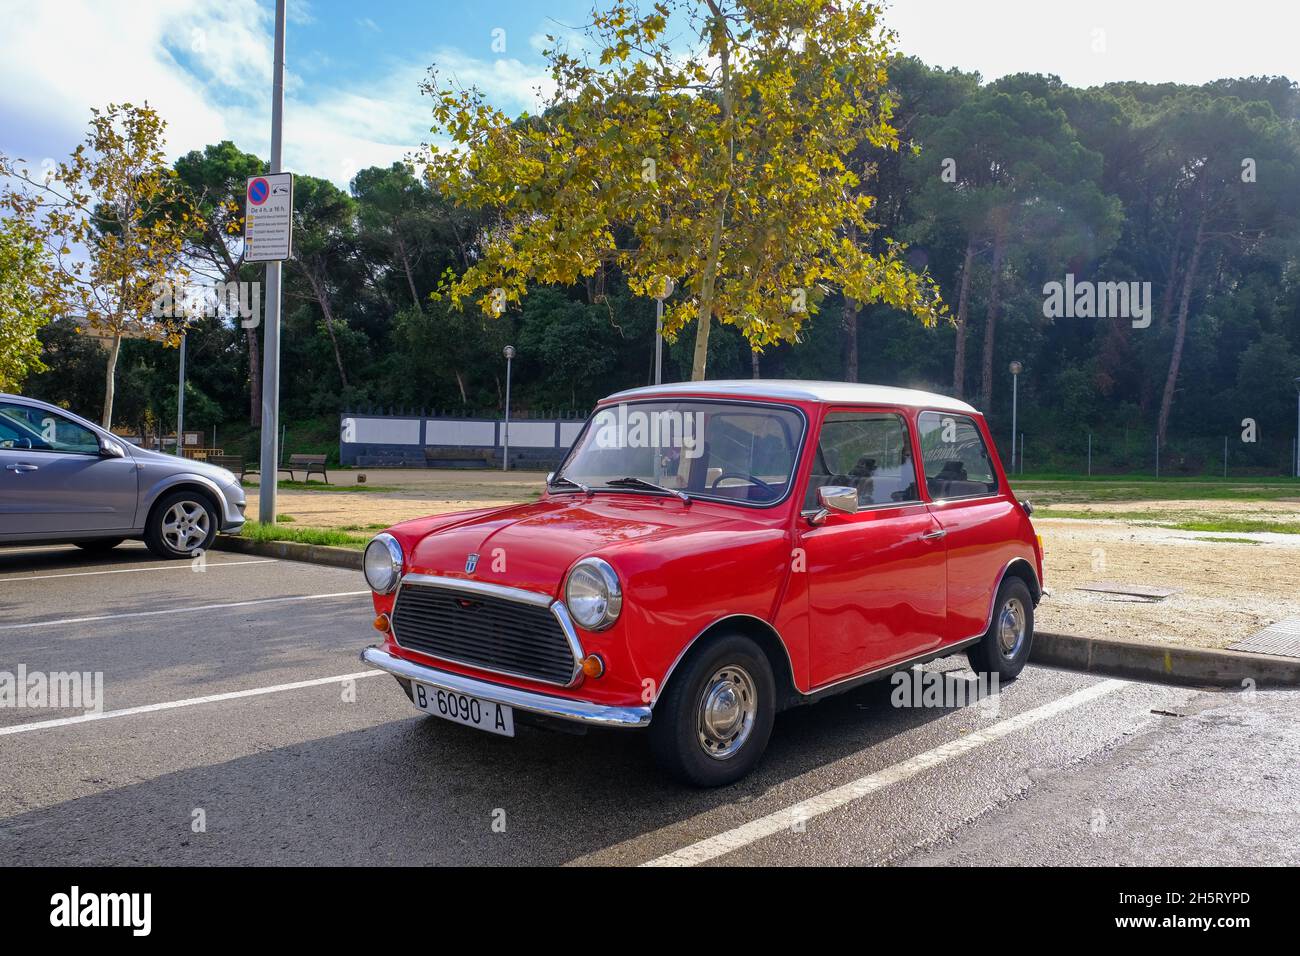 Lloret de Mar, Catalonia, Spain - 11.11.2021: bright red Mini 850 model old retro car in perfect condition parked on the city street Stock Photo